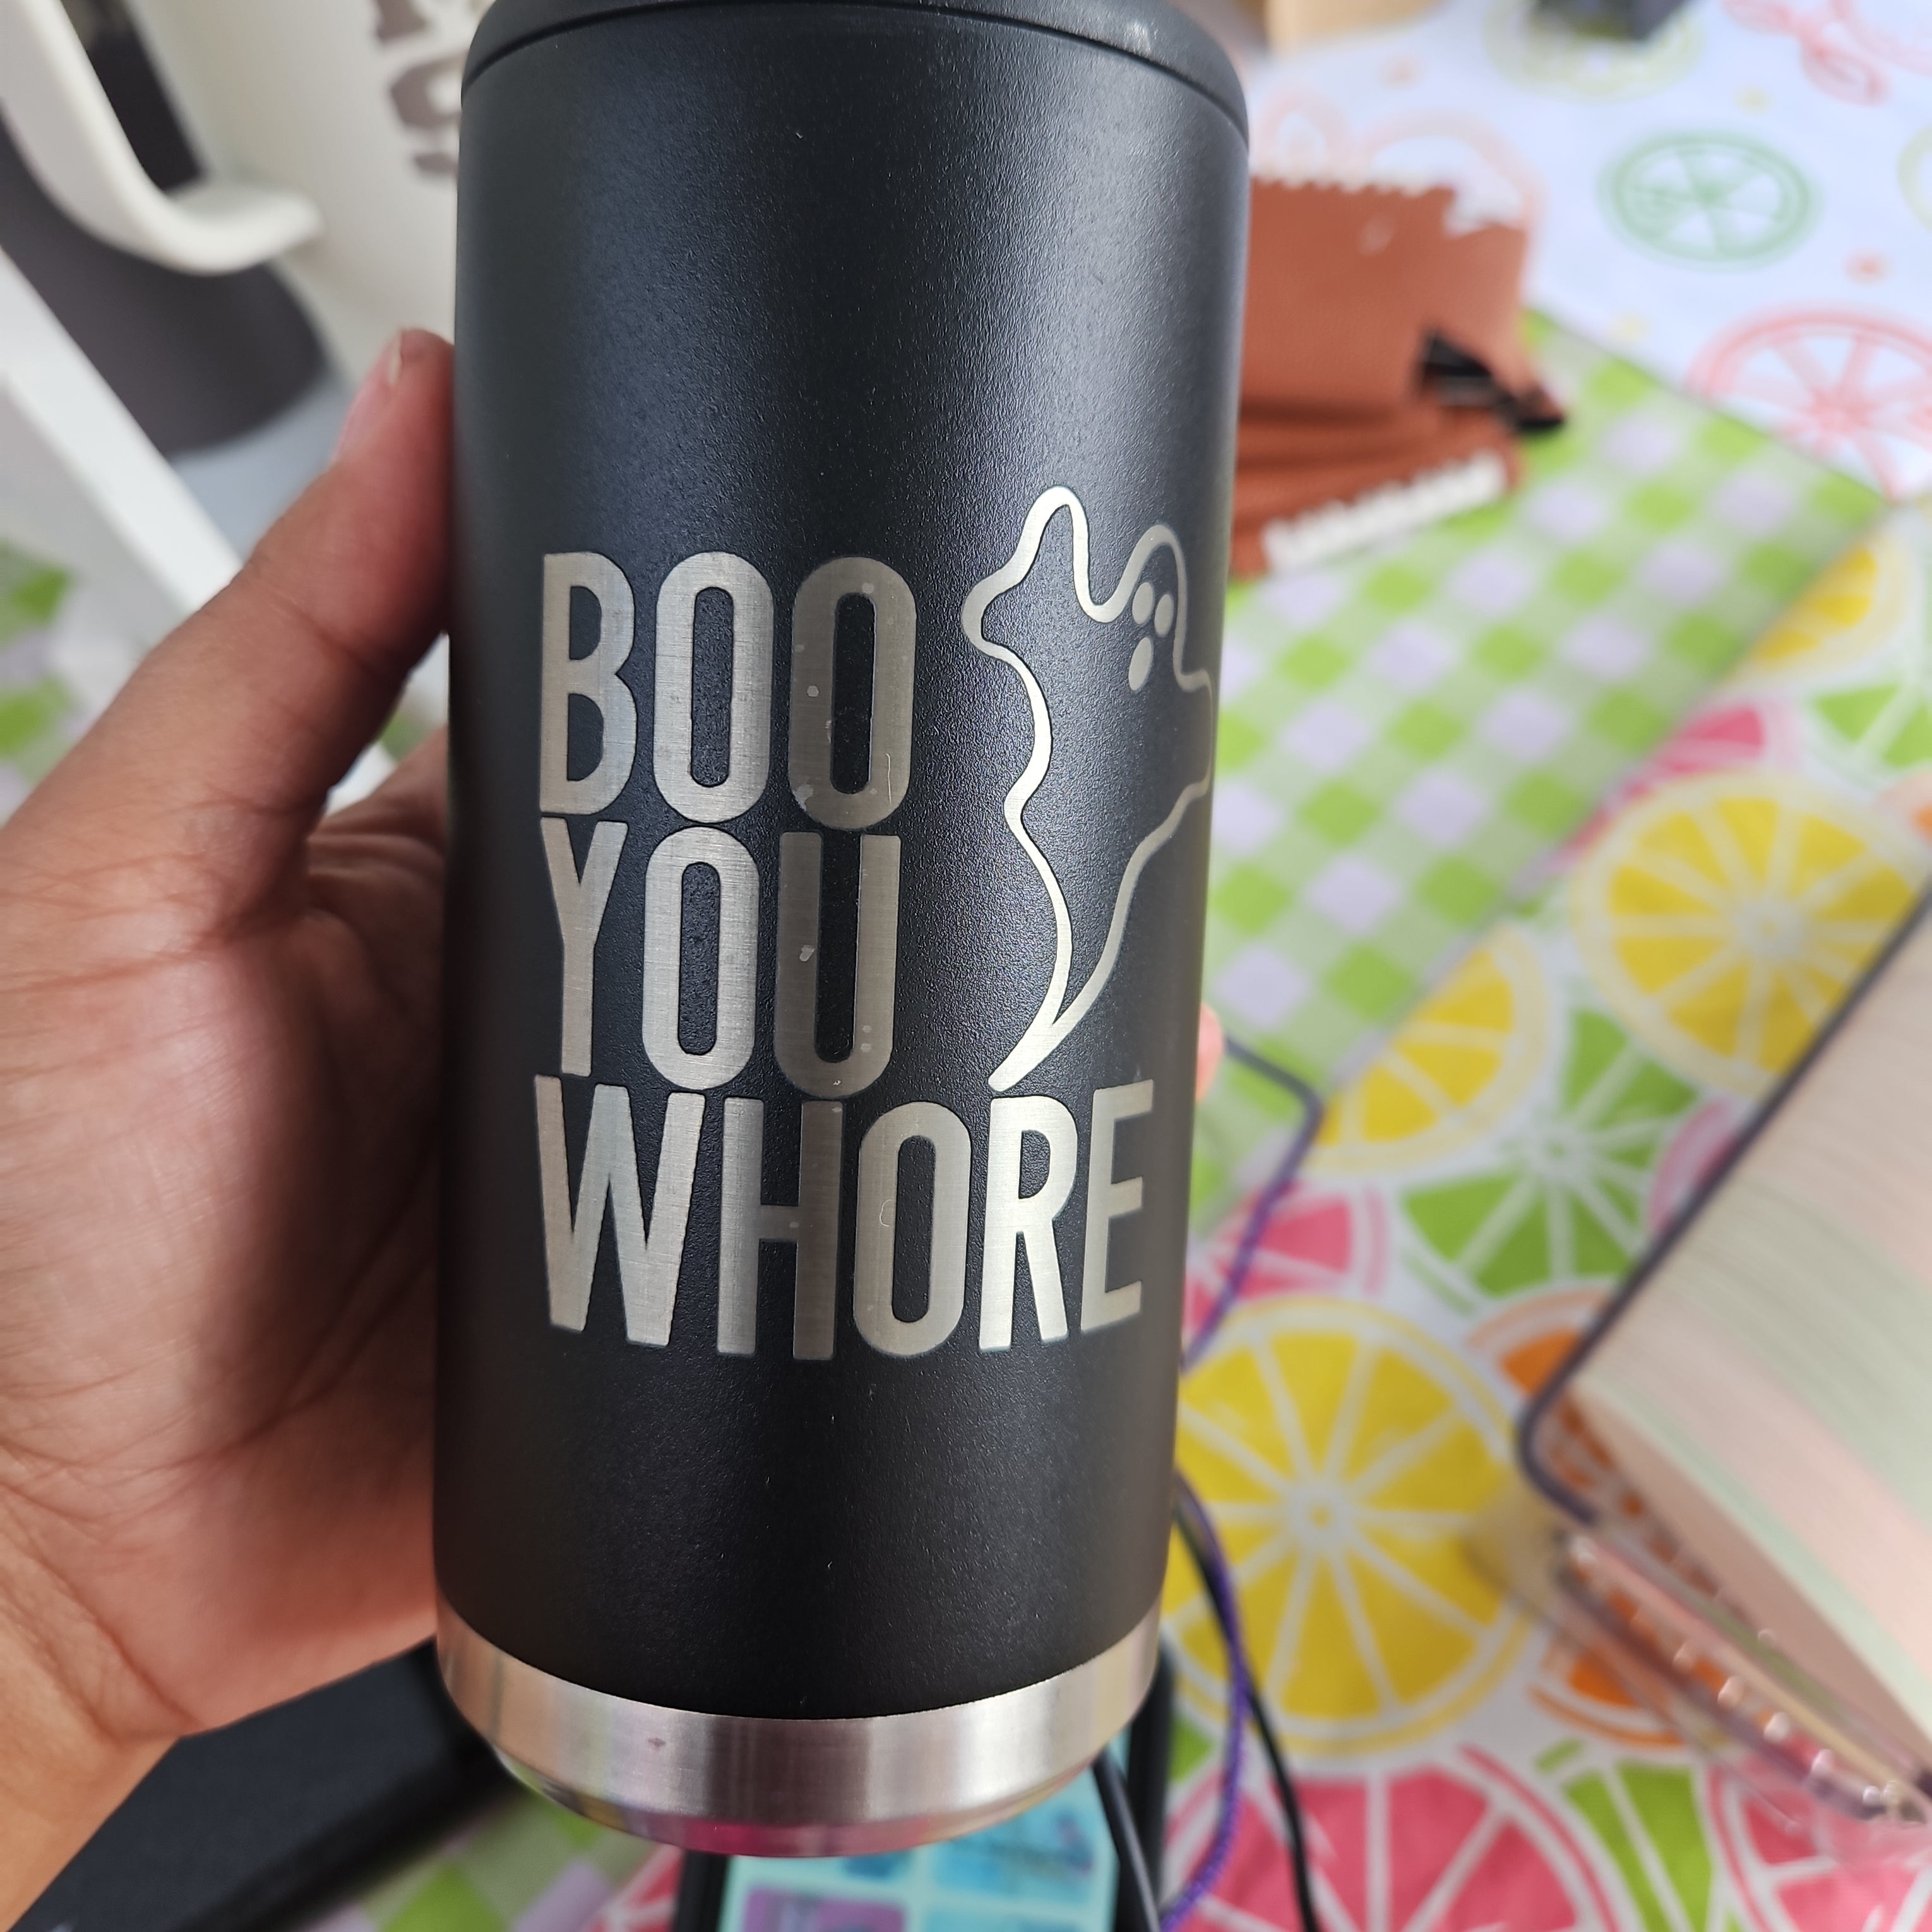 Boo You Whore - Mean Girls Inspired Stainless Cups - Fun Halloween Cups